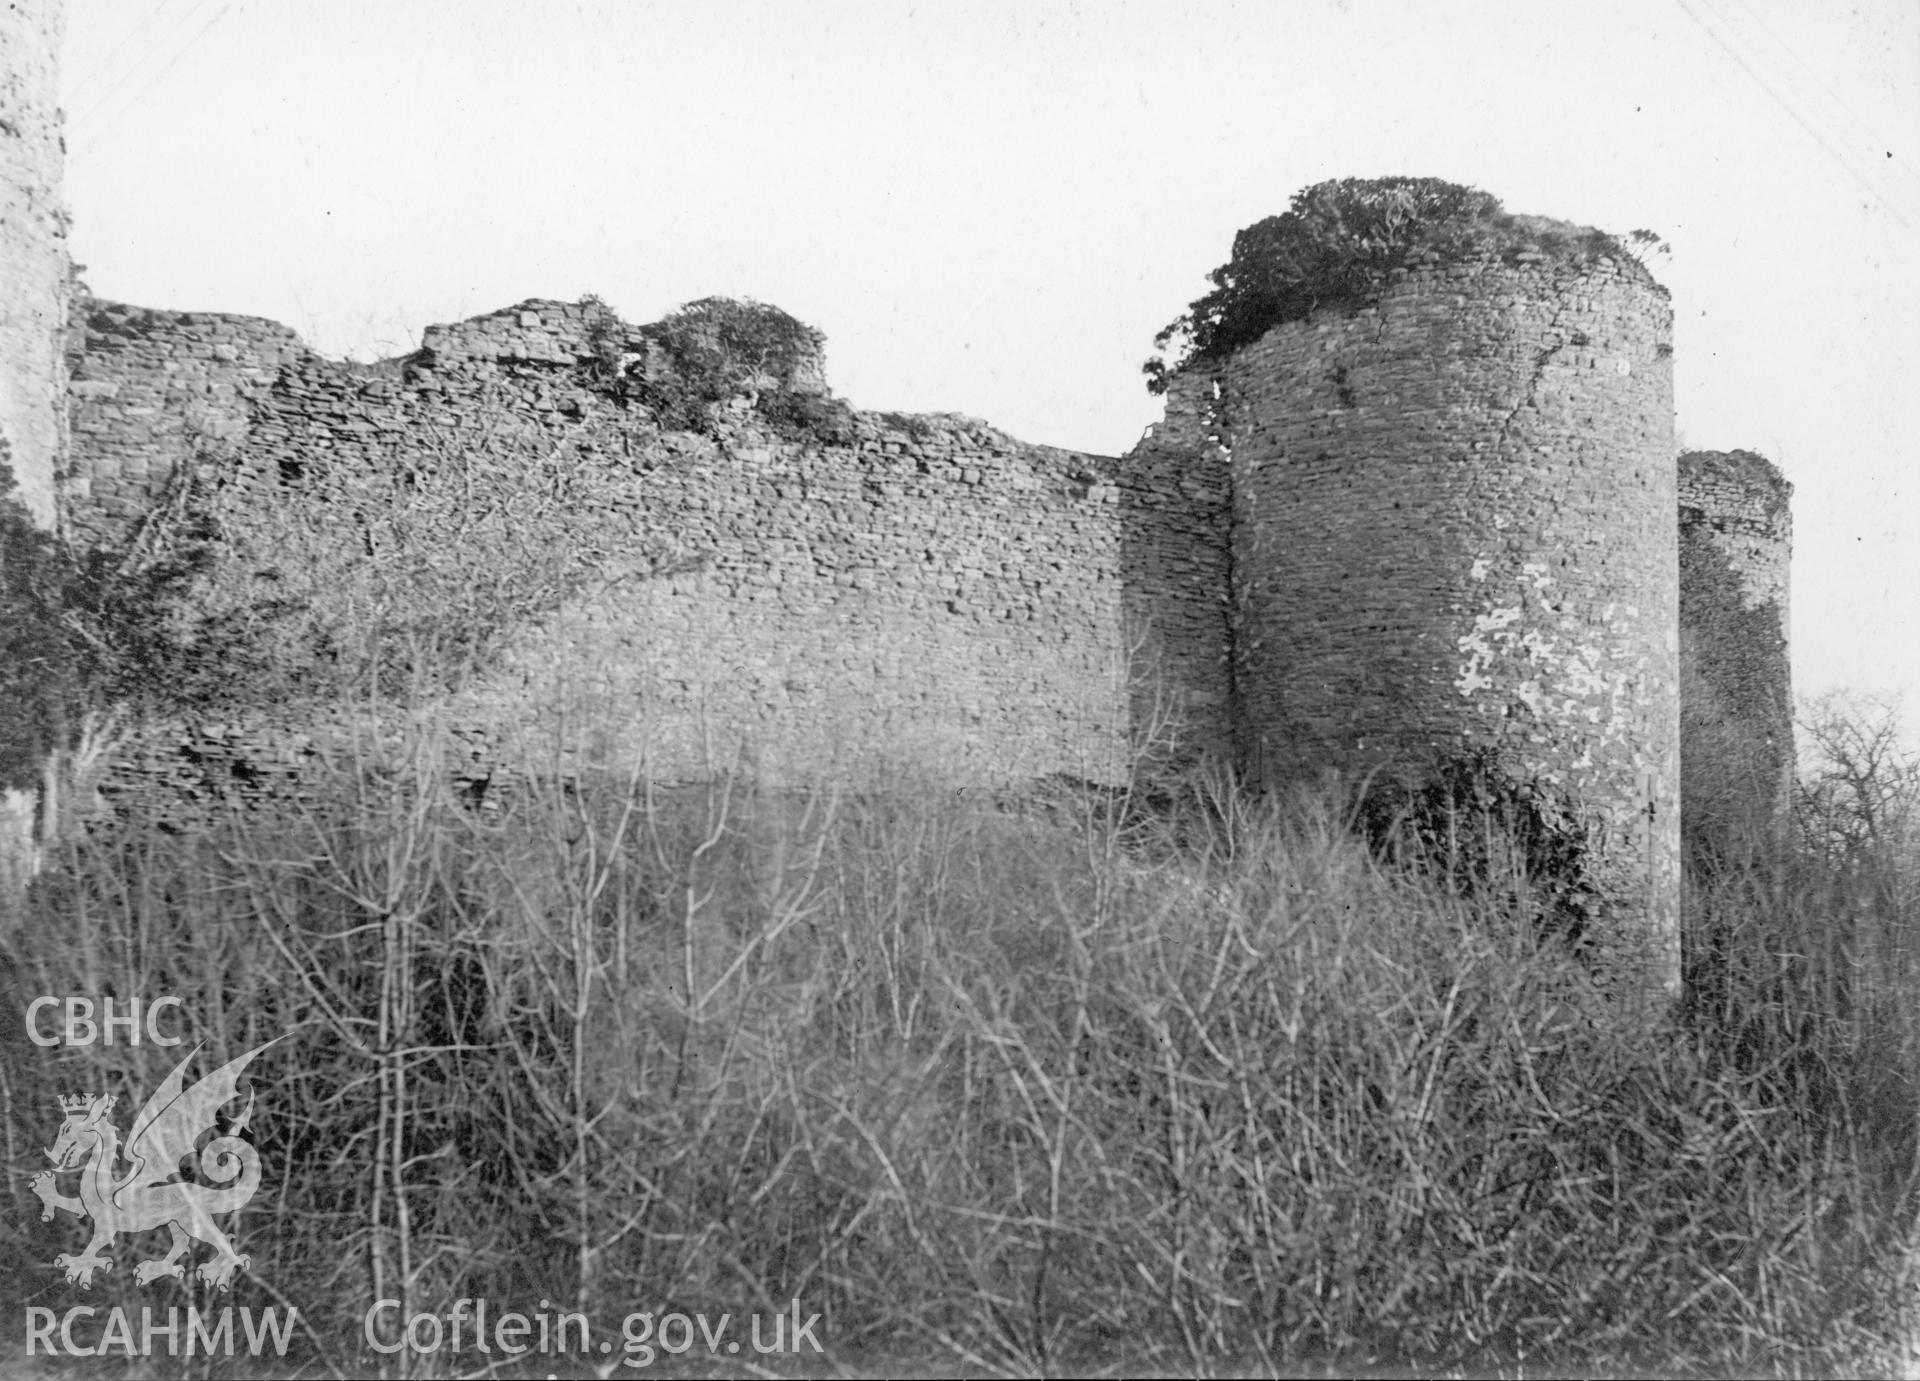 Digital copy of a photograph showing White Castle, dated 1920.